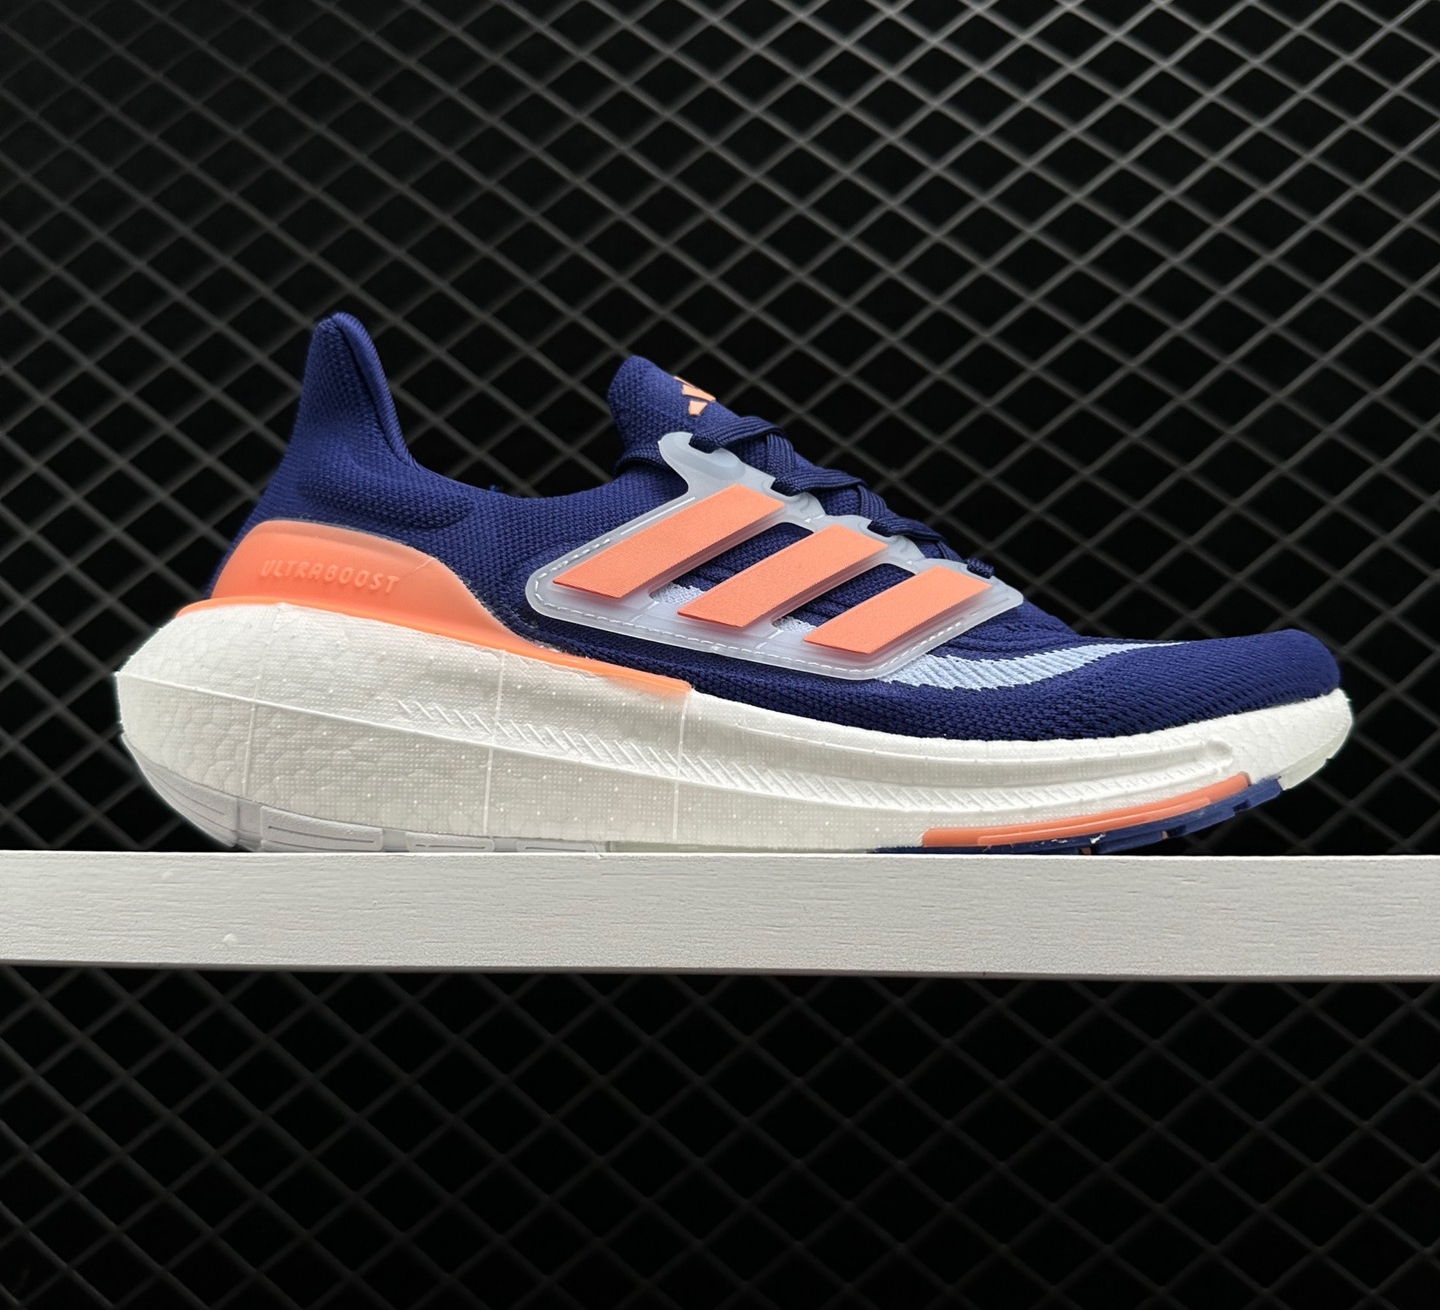 Adidas Ultra Boost Light Lucid Blue Coral Fusion Blue - Premium Quality Running Shoes